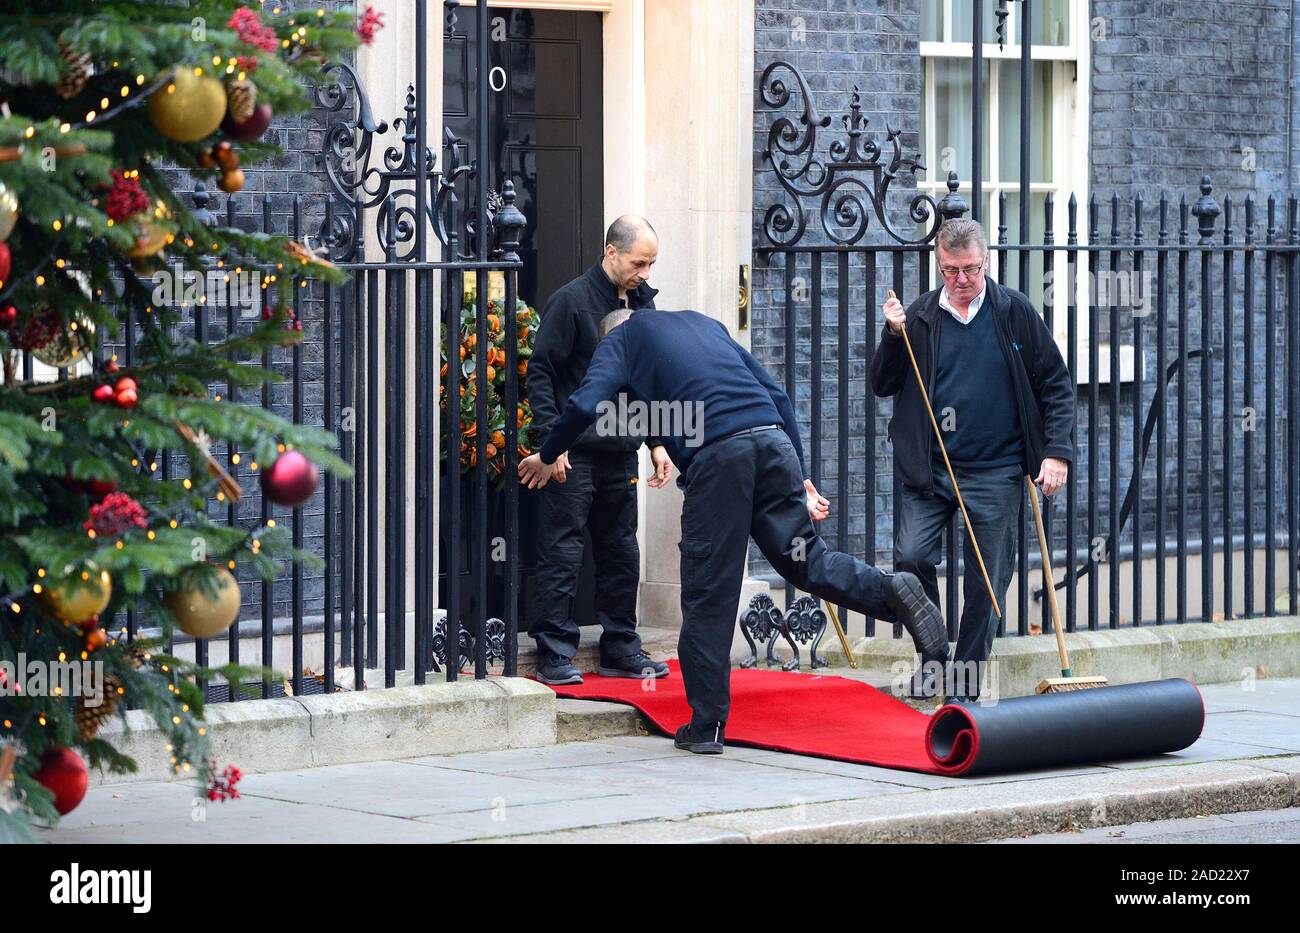 London, UK. 3rd December 2019. Leaders arrive in Downing Street for a meeting ahead of tomorrow's NATO summit. Rolling out the red carpet Credit: PjrFoto/Alamy Live News Stock Photo